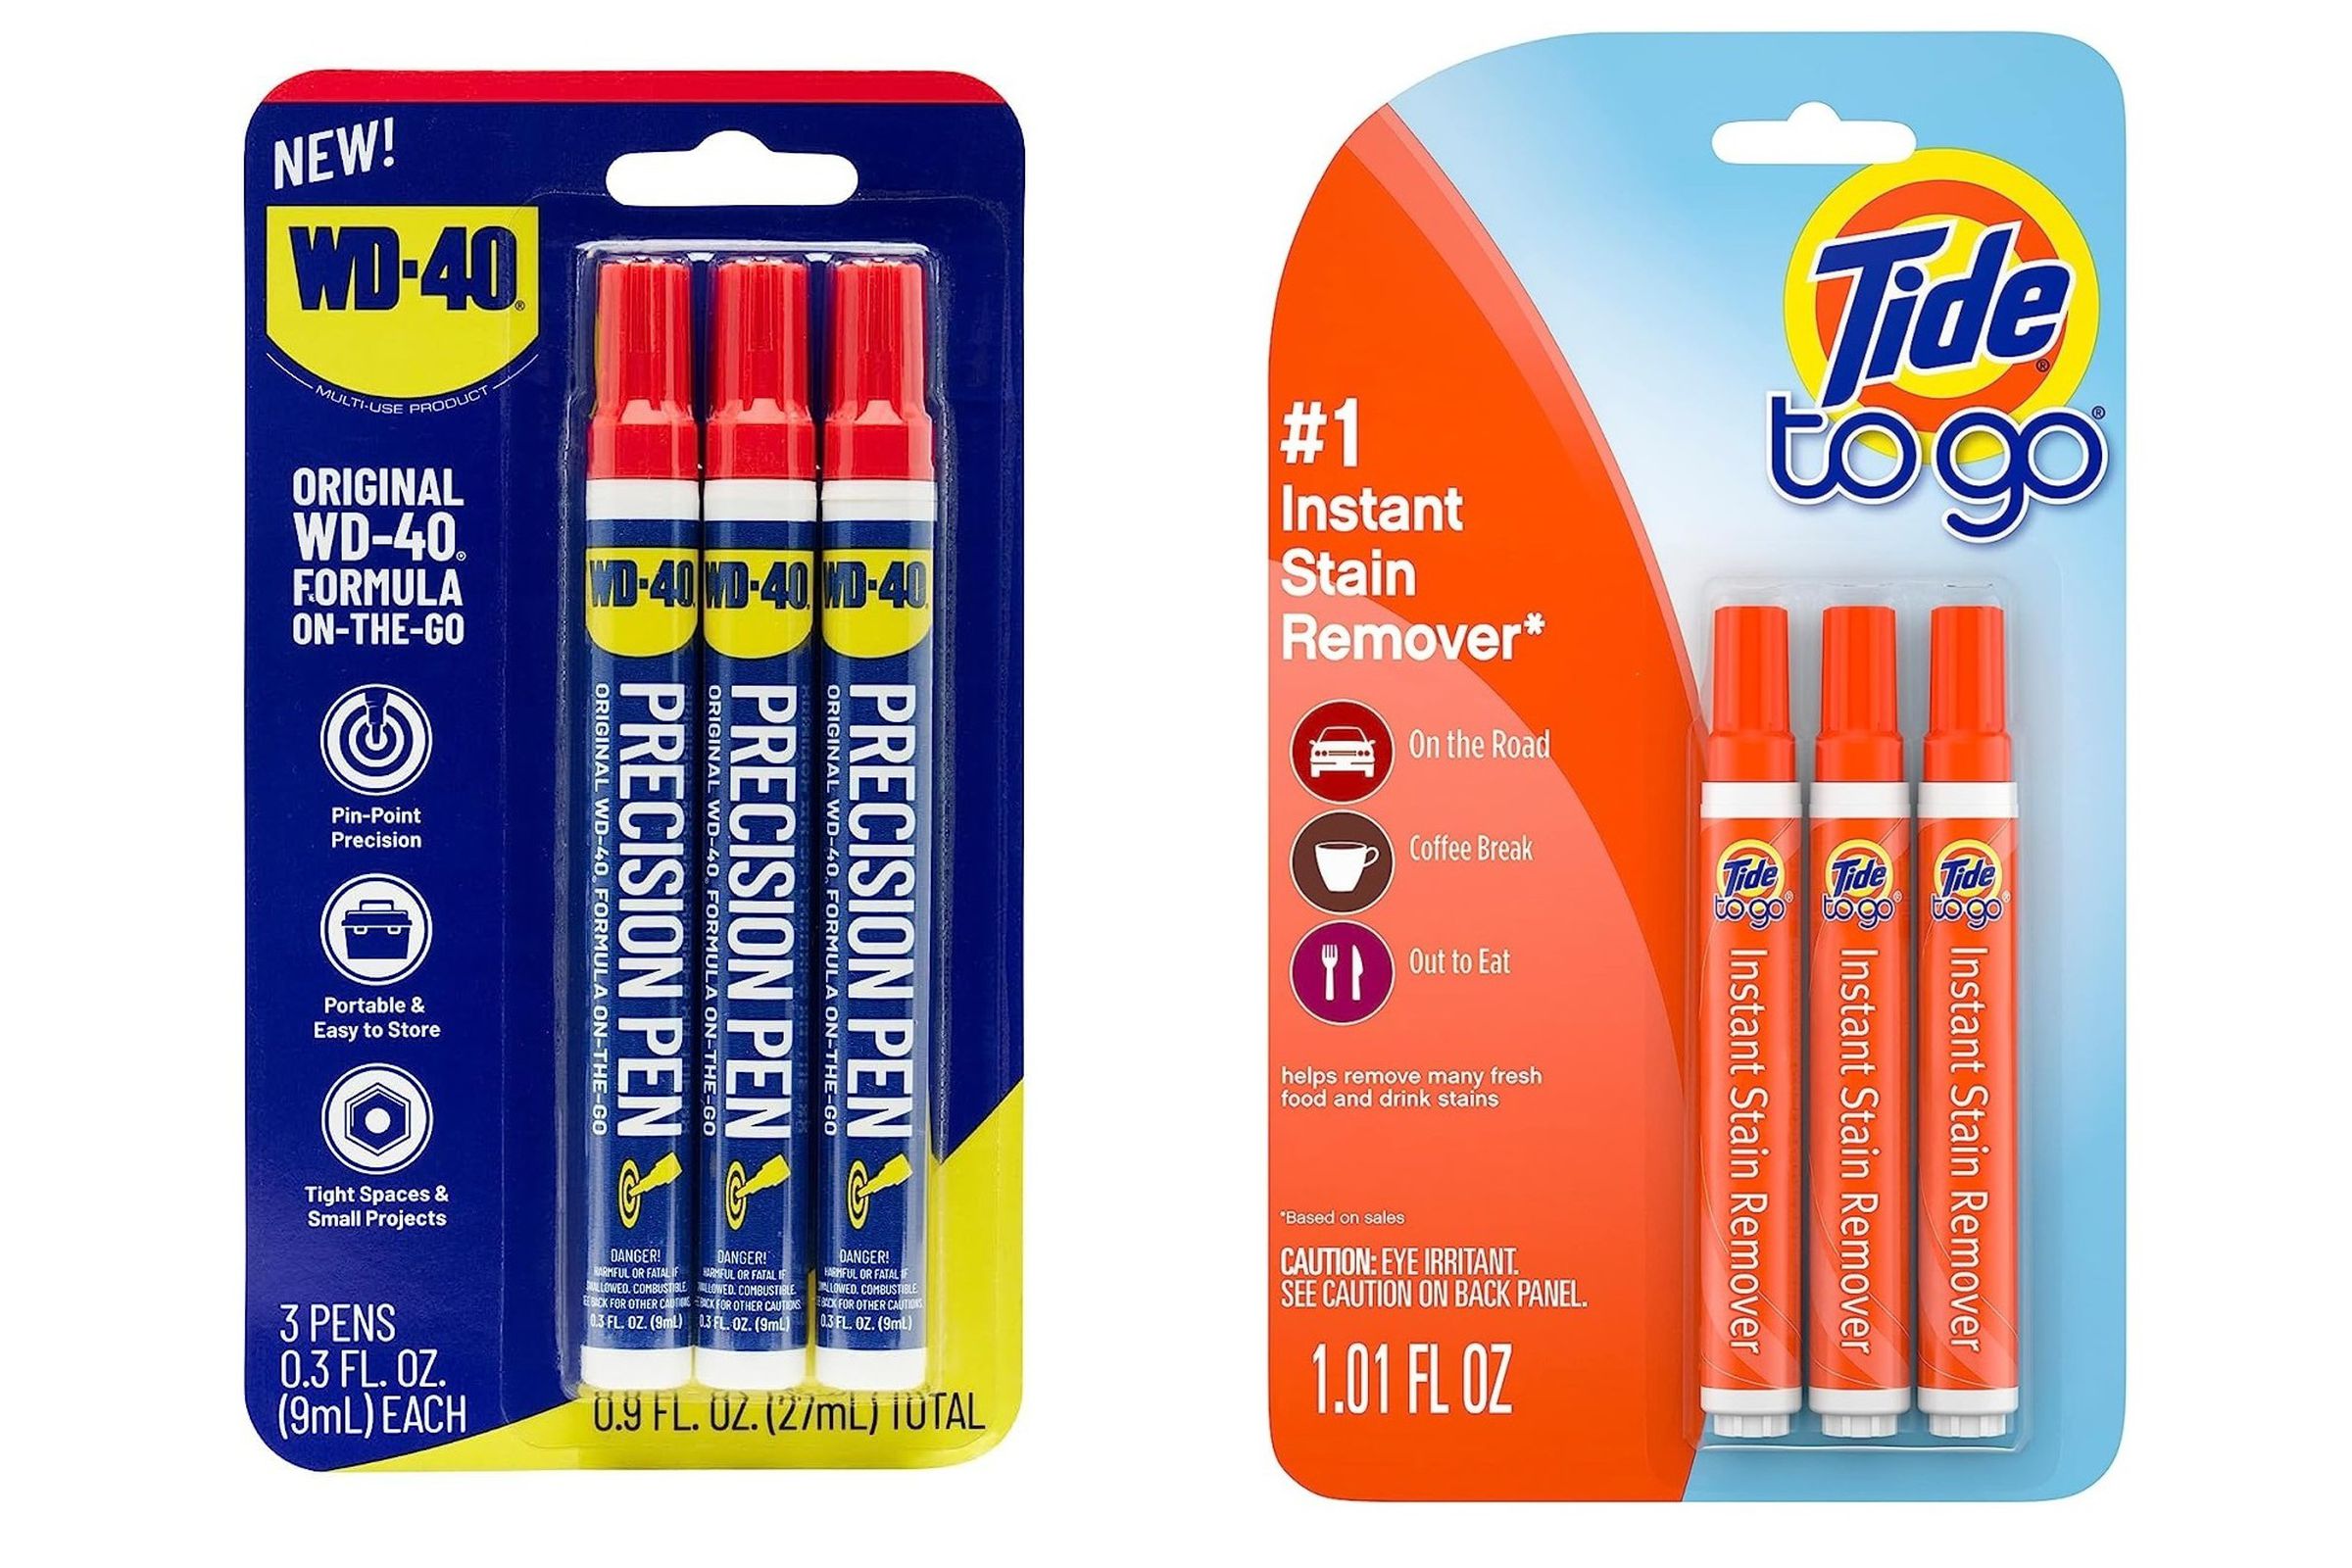 Oh my god, WD-40 is available in a Tide pen - The Verge